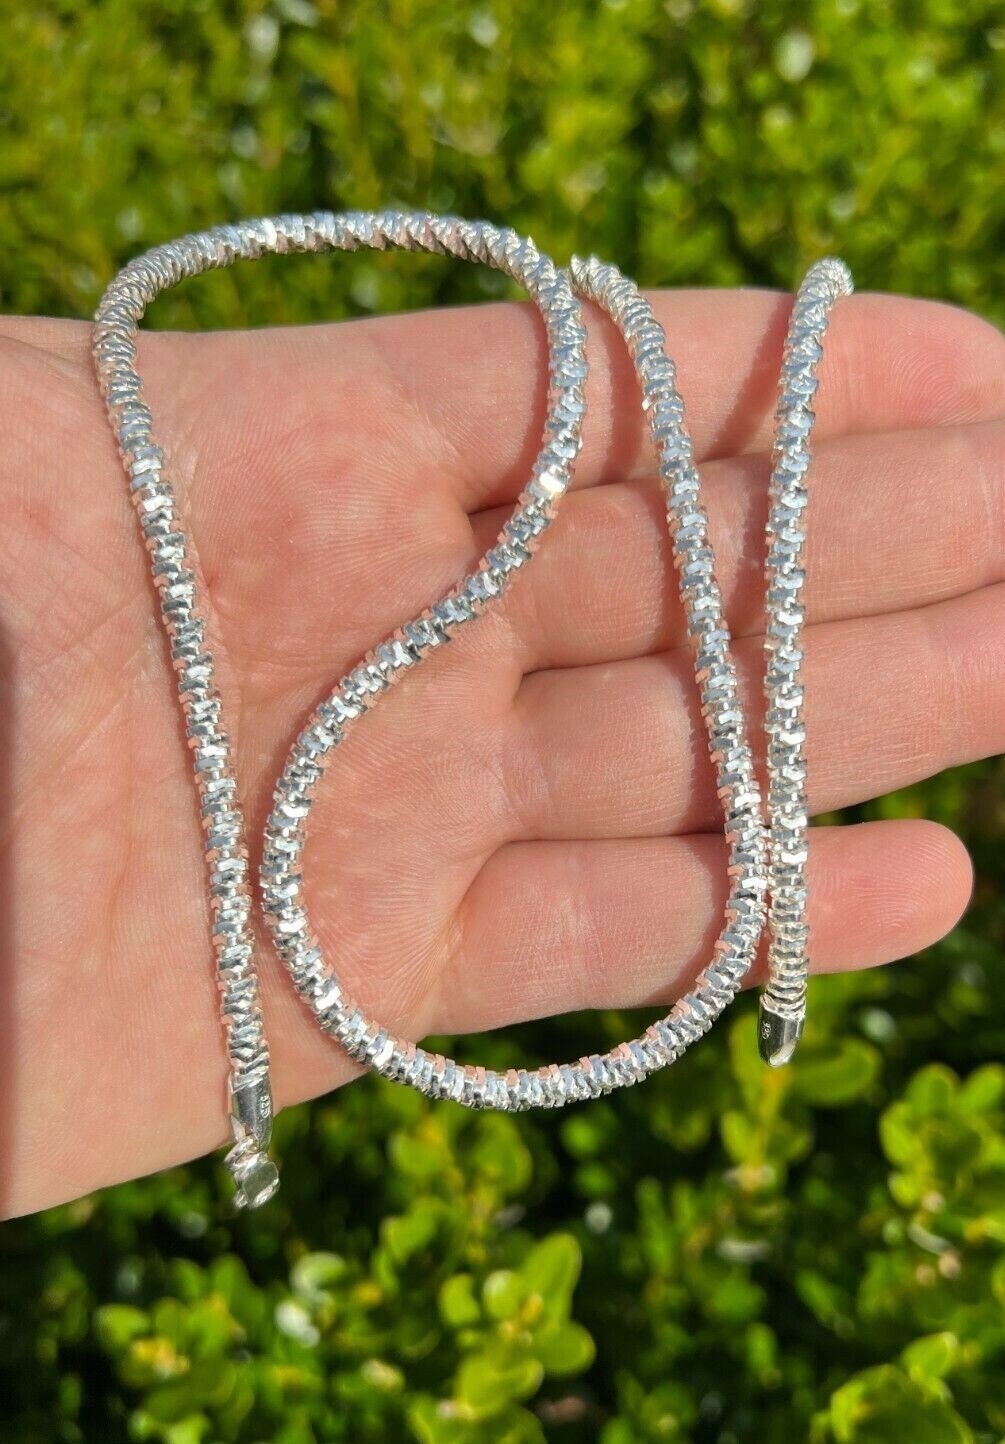 4mm Silver Rope Chain, Silver Chain for Men, Diamond Cut Rope Necklace -  Proclamation